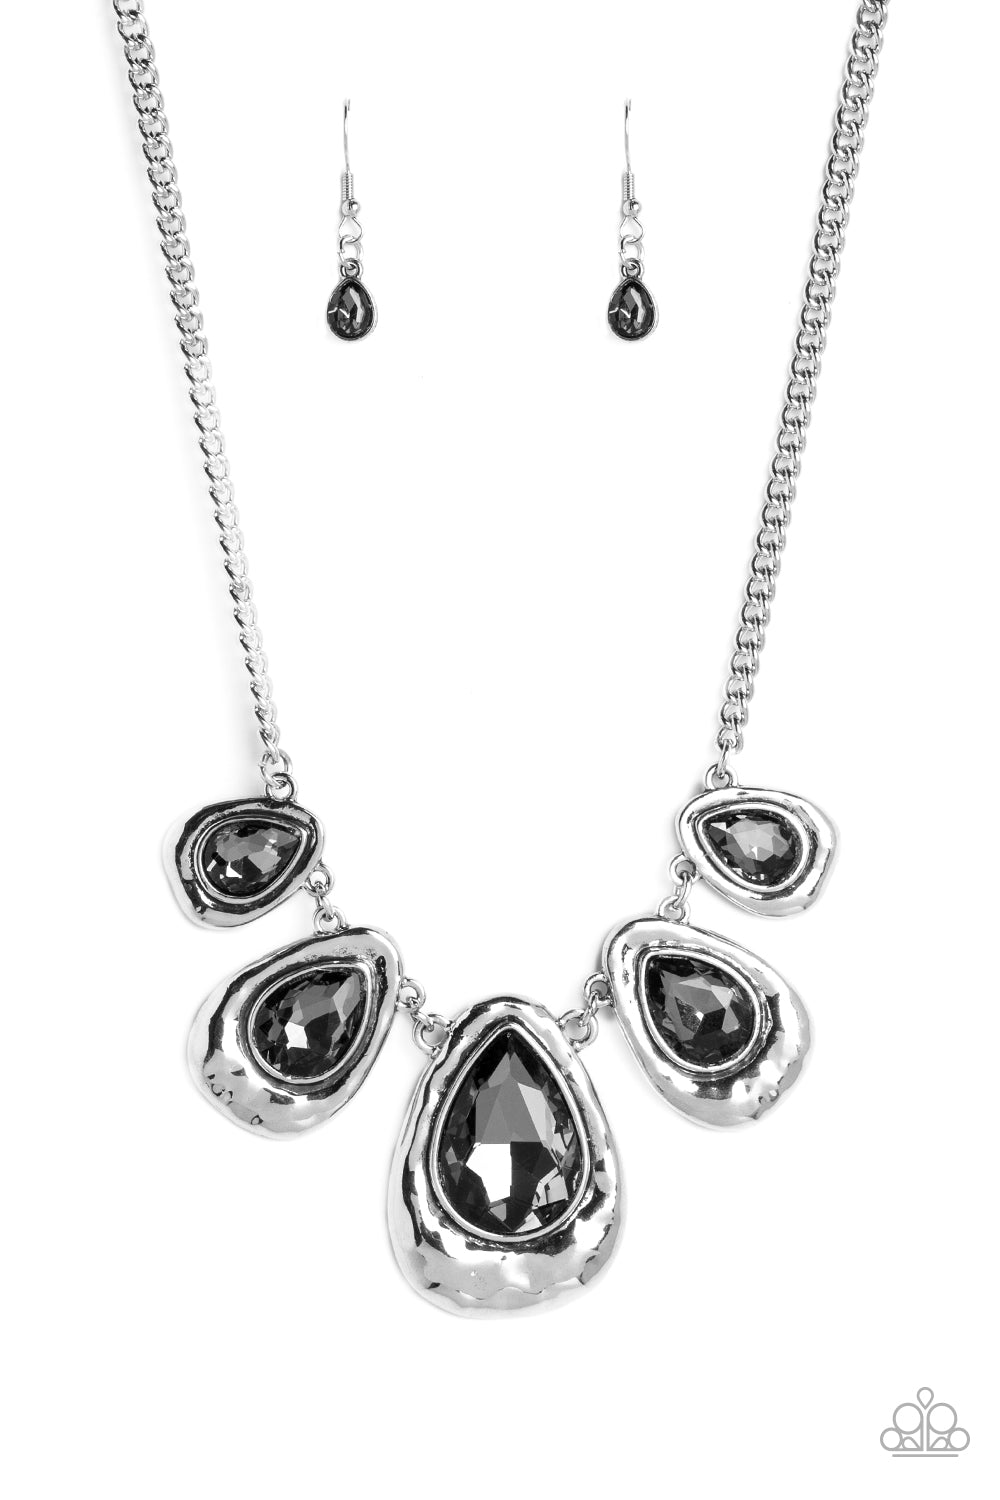 Formally Forged - Silver Necklace Set Preorder - Princess Glam Shop